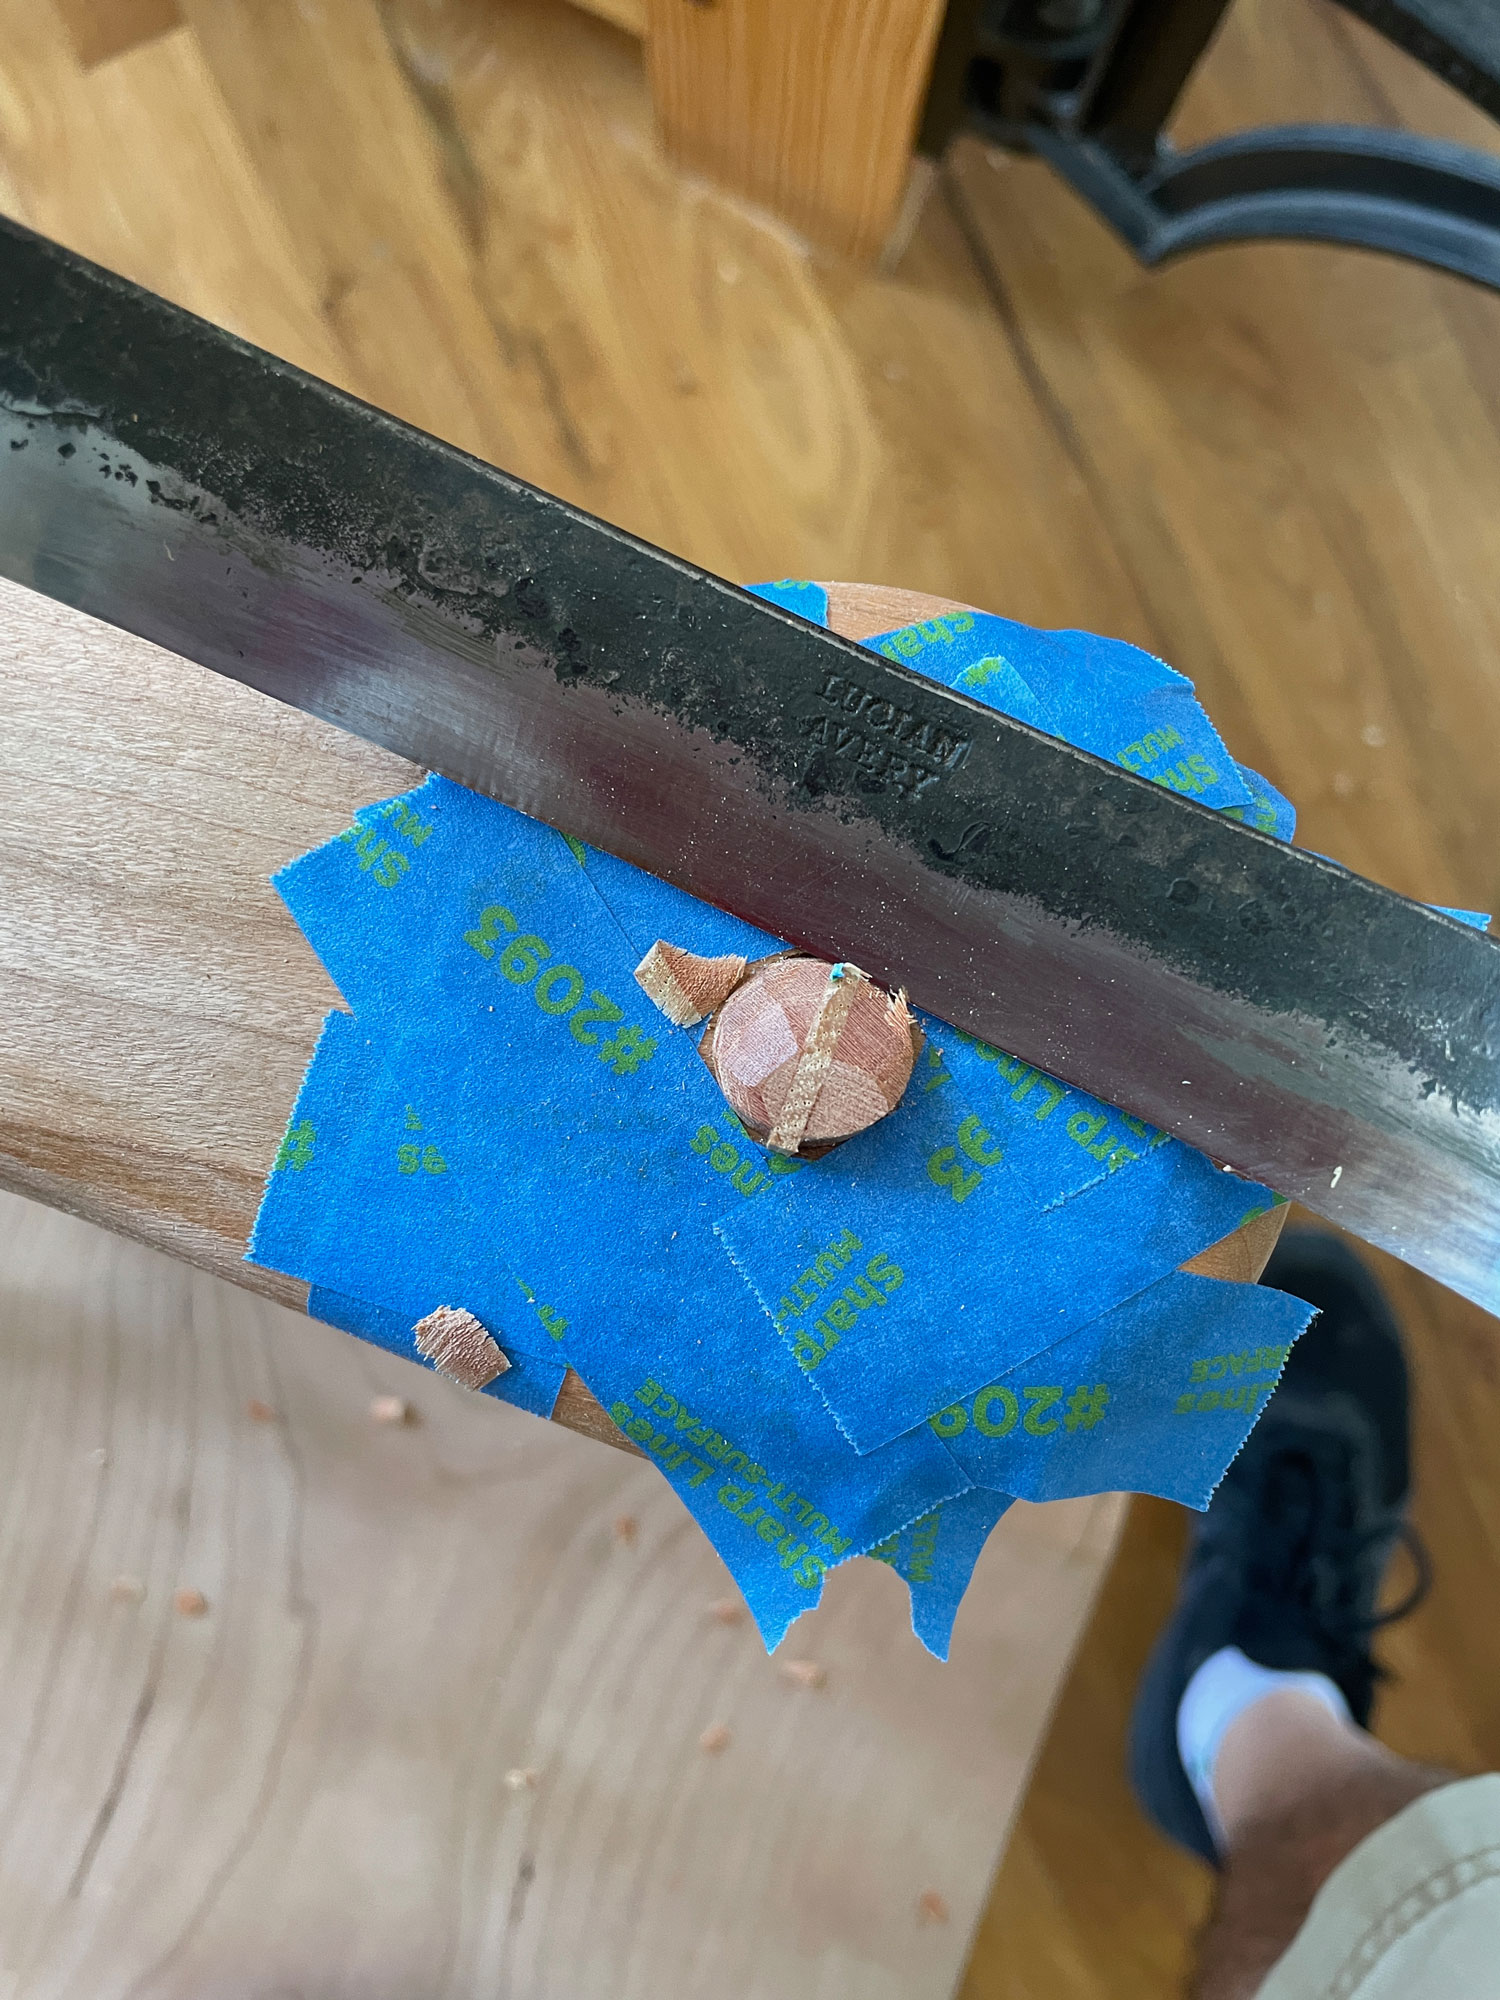 Scorp chipping away at a proud tenon